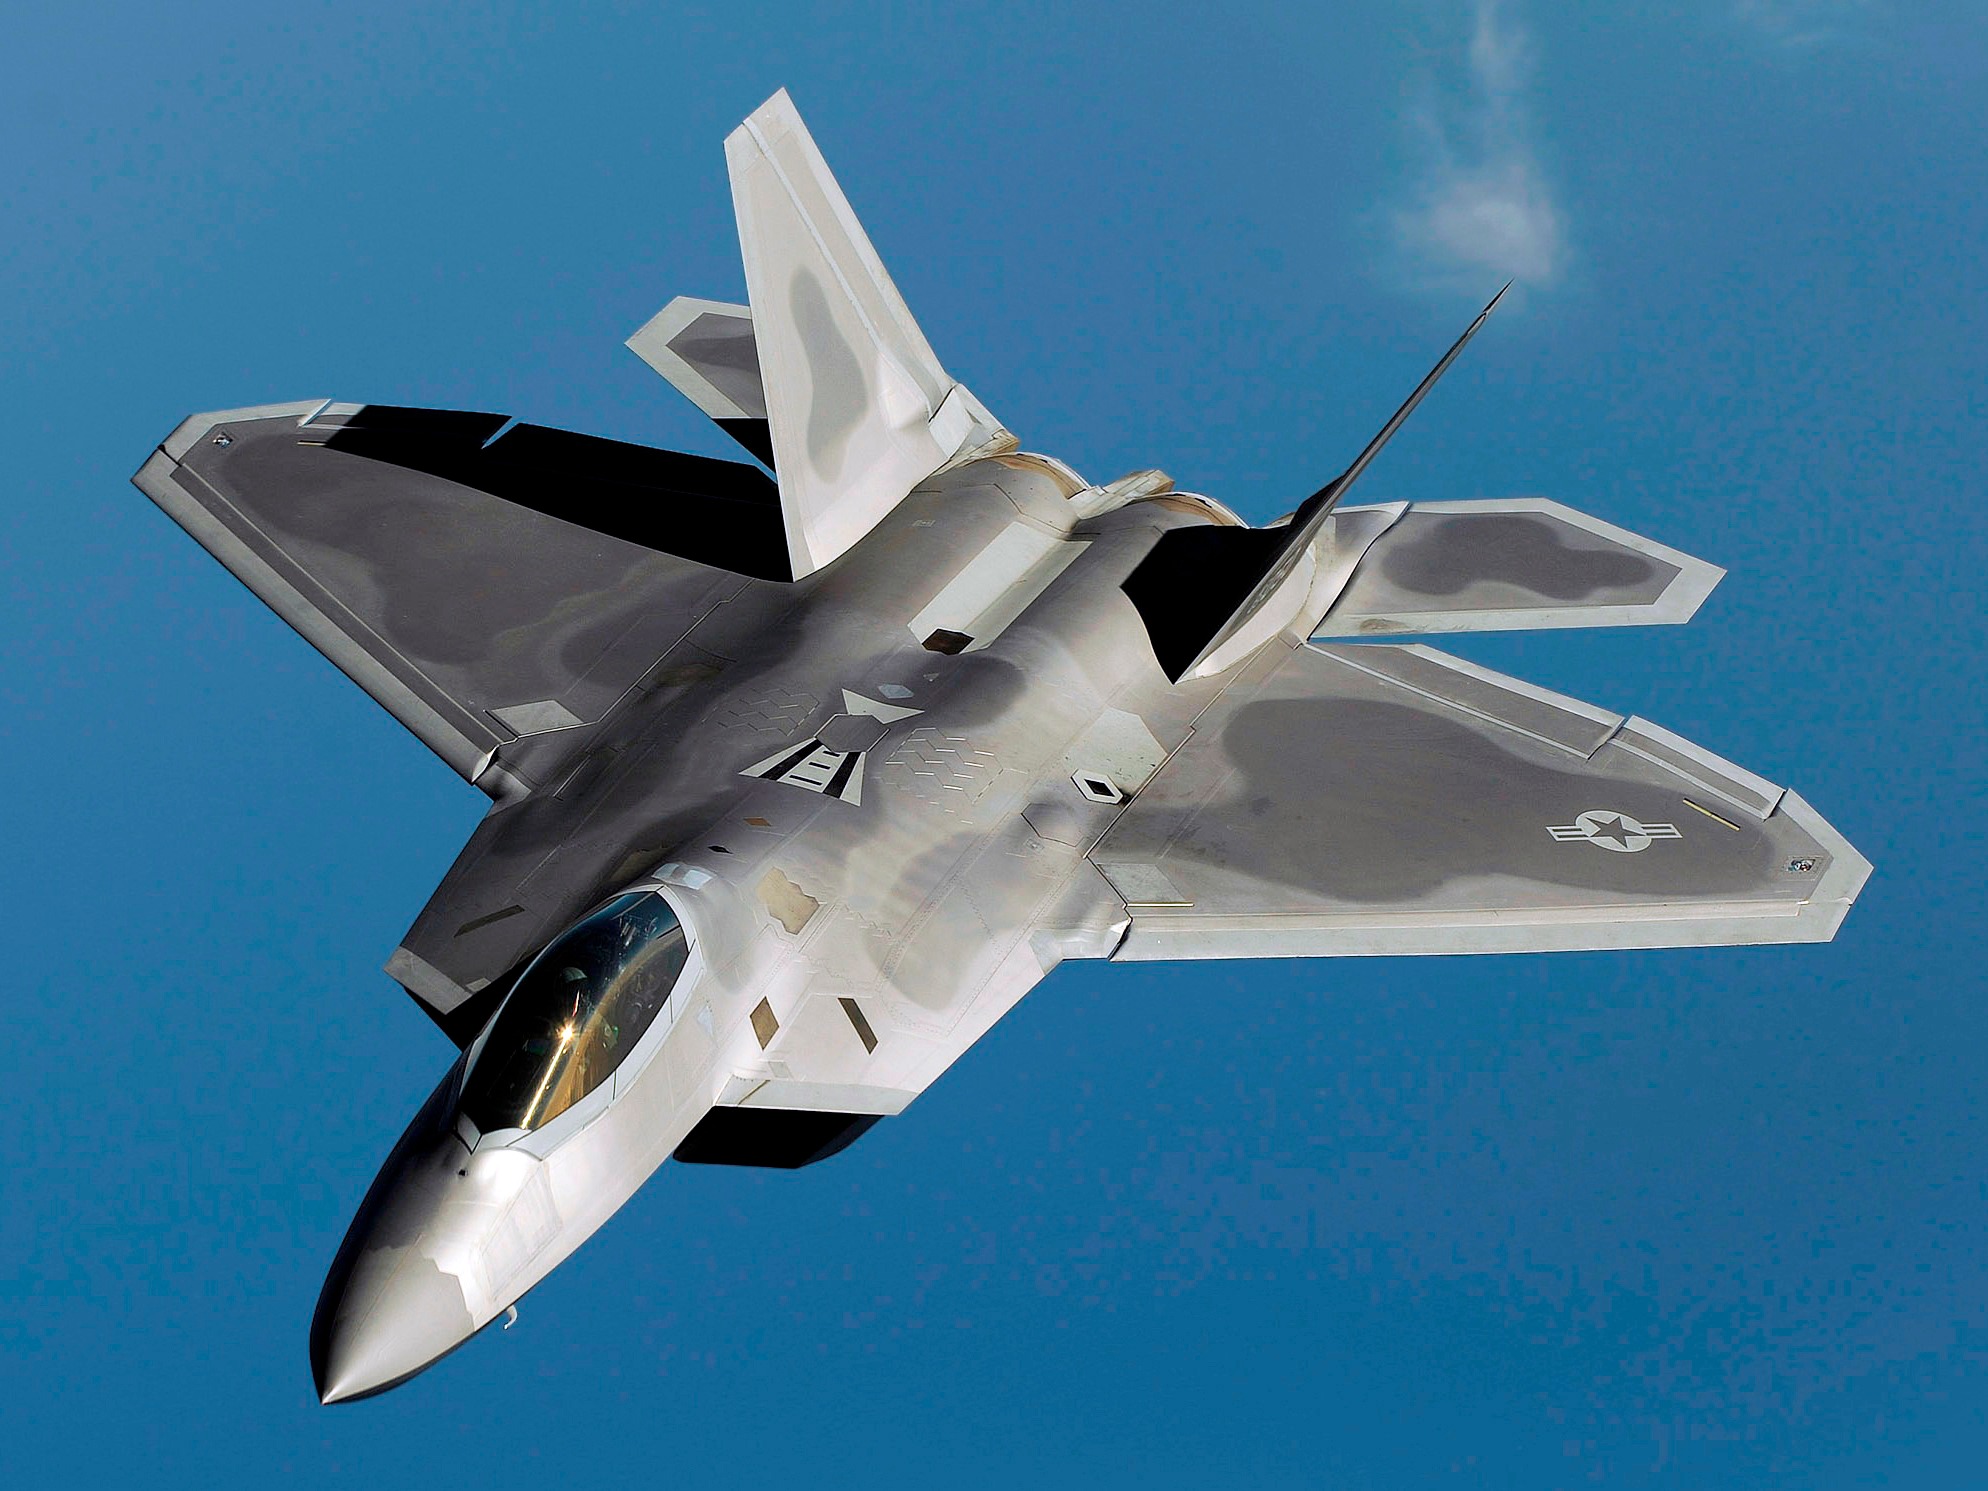 in 2013 two Iranian F-4 Phantoms attempted to intercept a drone escorted by two F-22 Raptors. Due to having a bumblebee-sized radar cross-section, an F-22 was able to fly underneath an F-4 to see its weapons without it noticing then flew next to the F-4 and radioed "you really ought to go home."